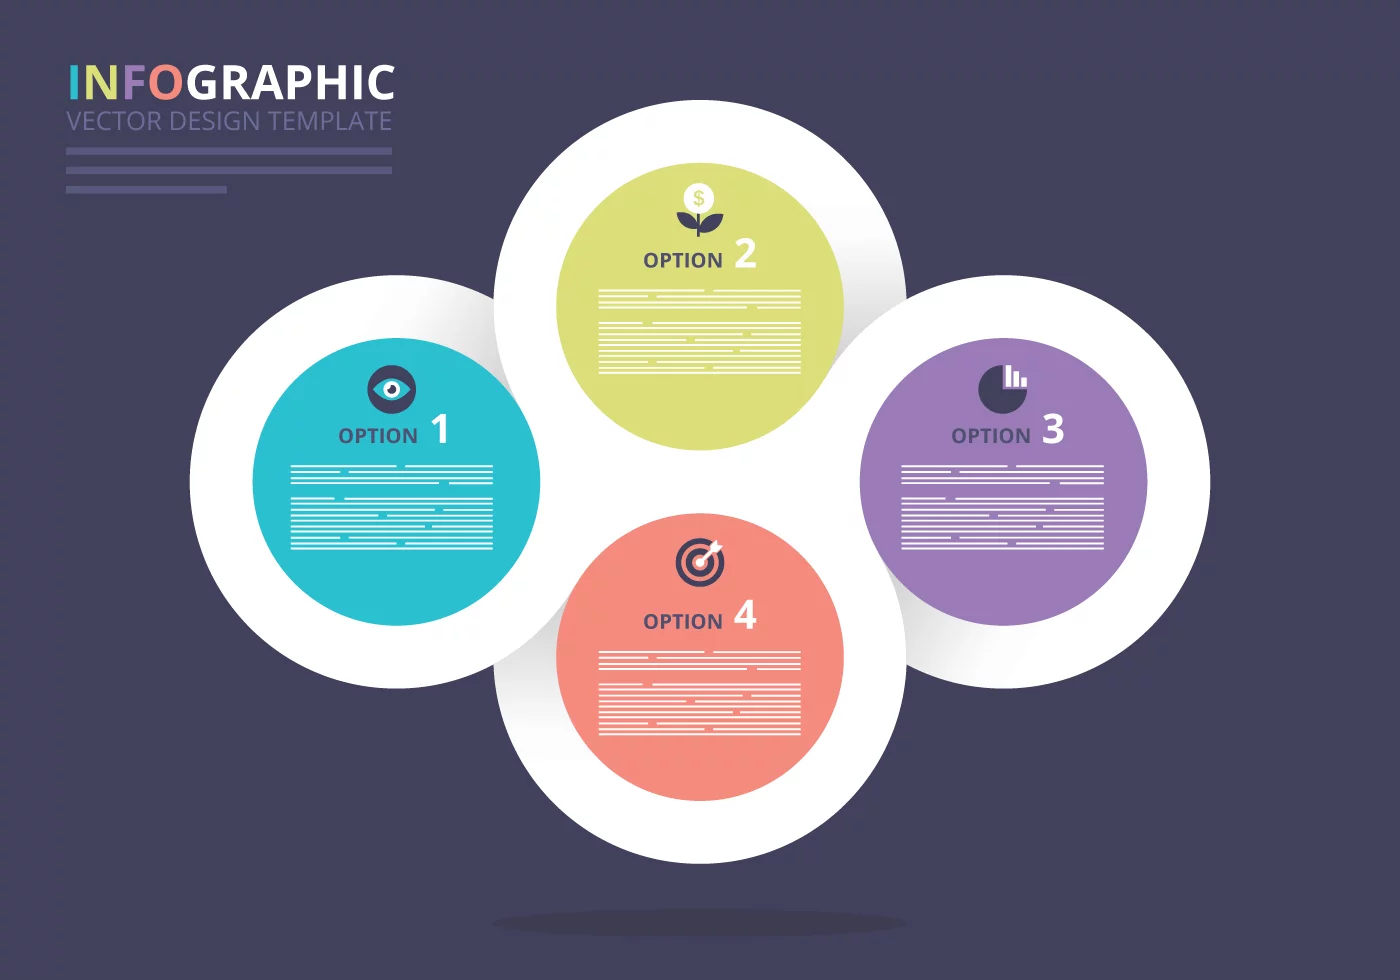 infographic templates for photoshop